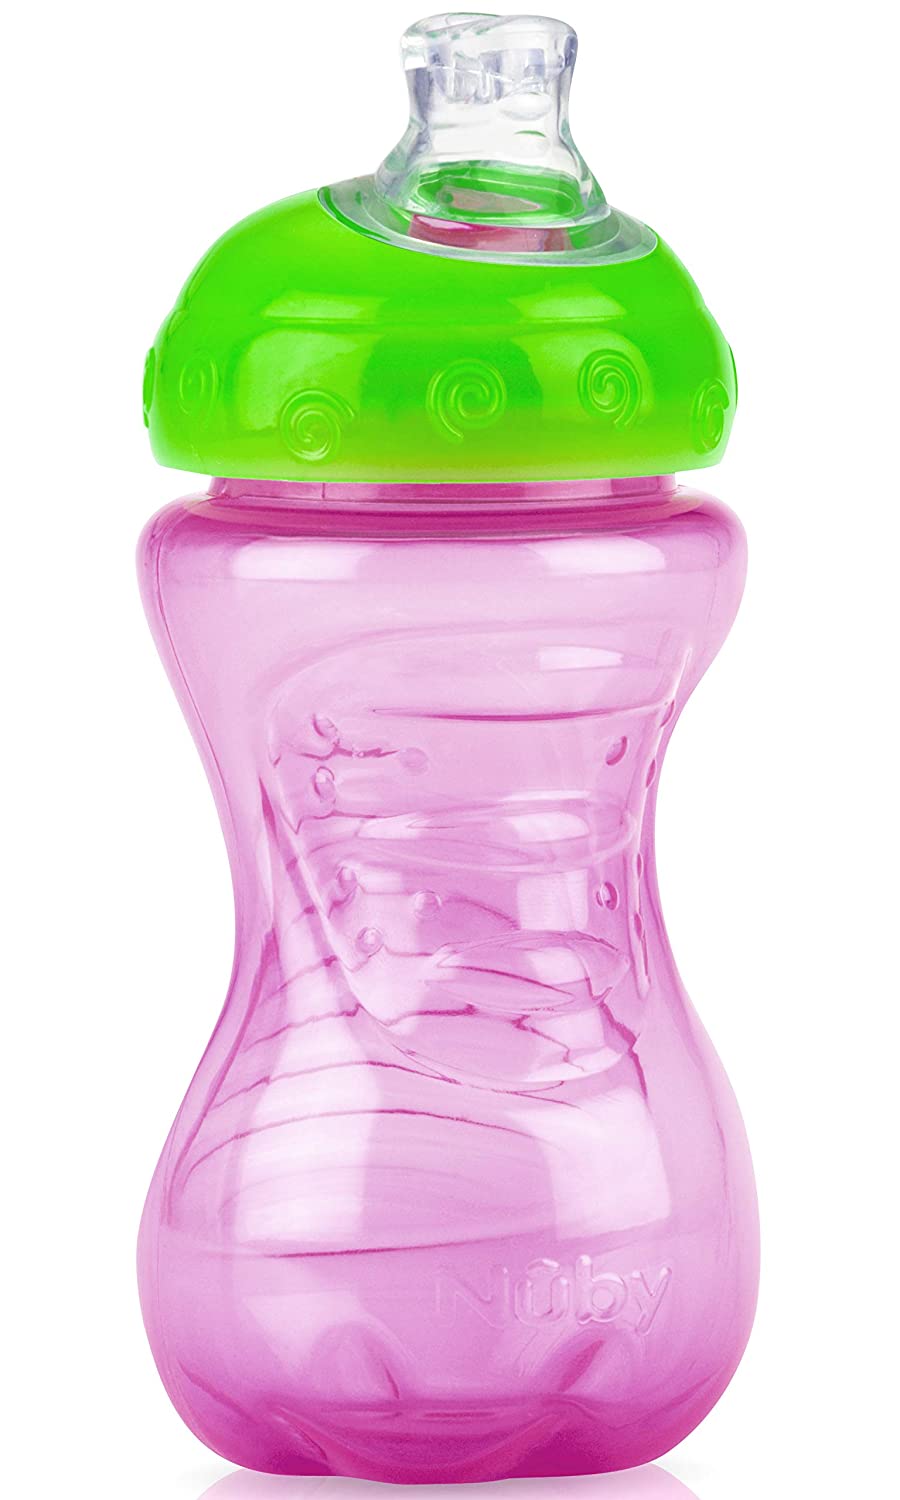 Nuby 2-Pack No-Spill Super Spout Easy Grip Cup, 10 Ounce, Pink and Purple